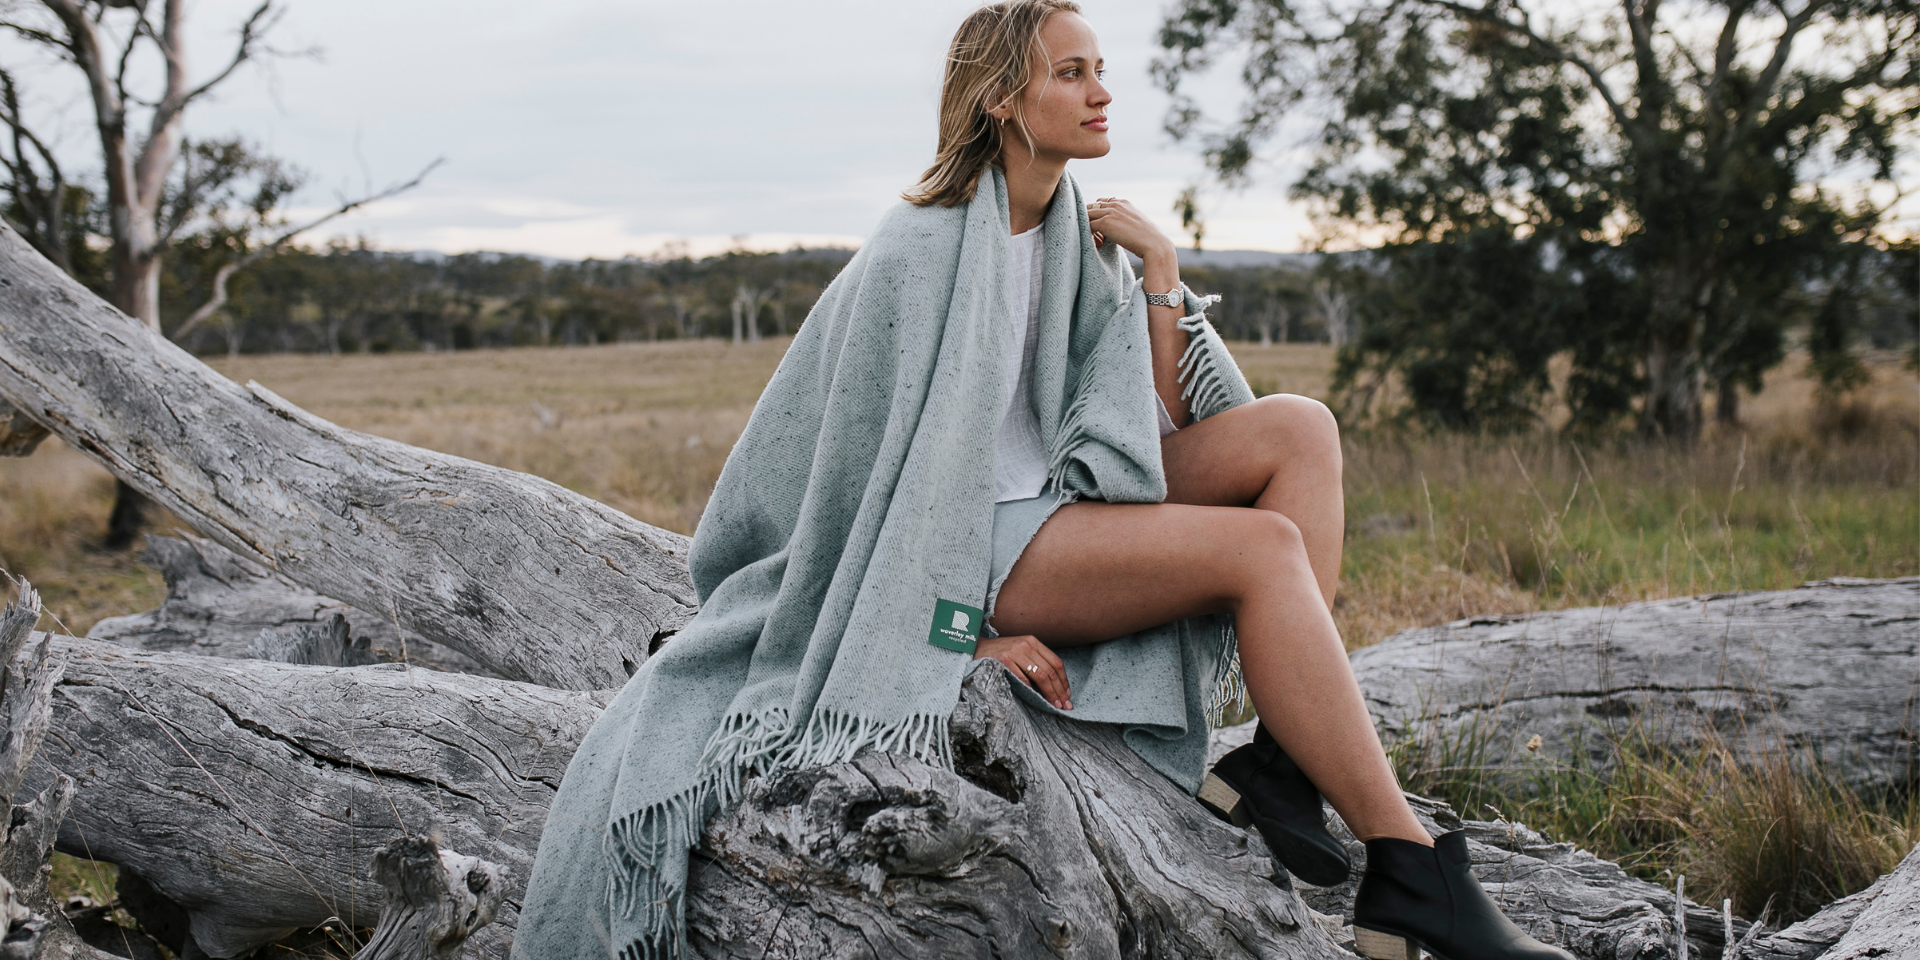 The world’s first blanket made with recycled Nudie Jeans.